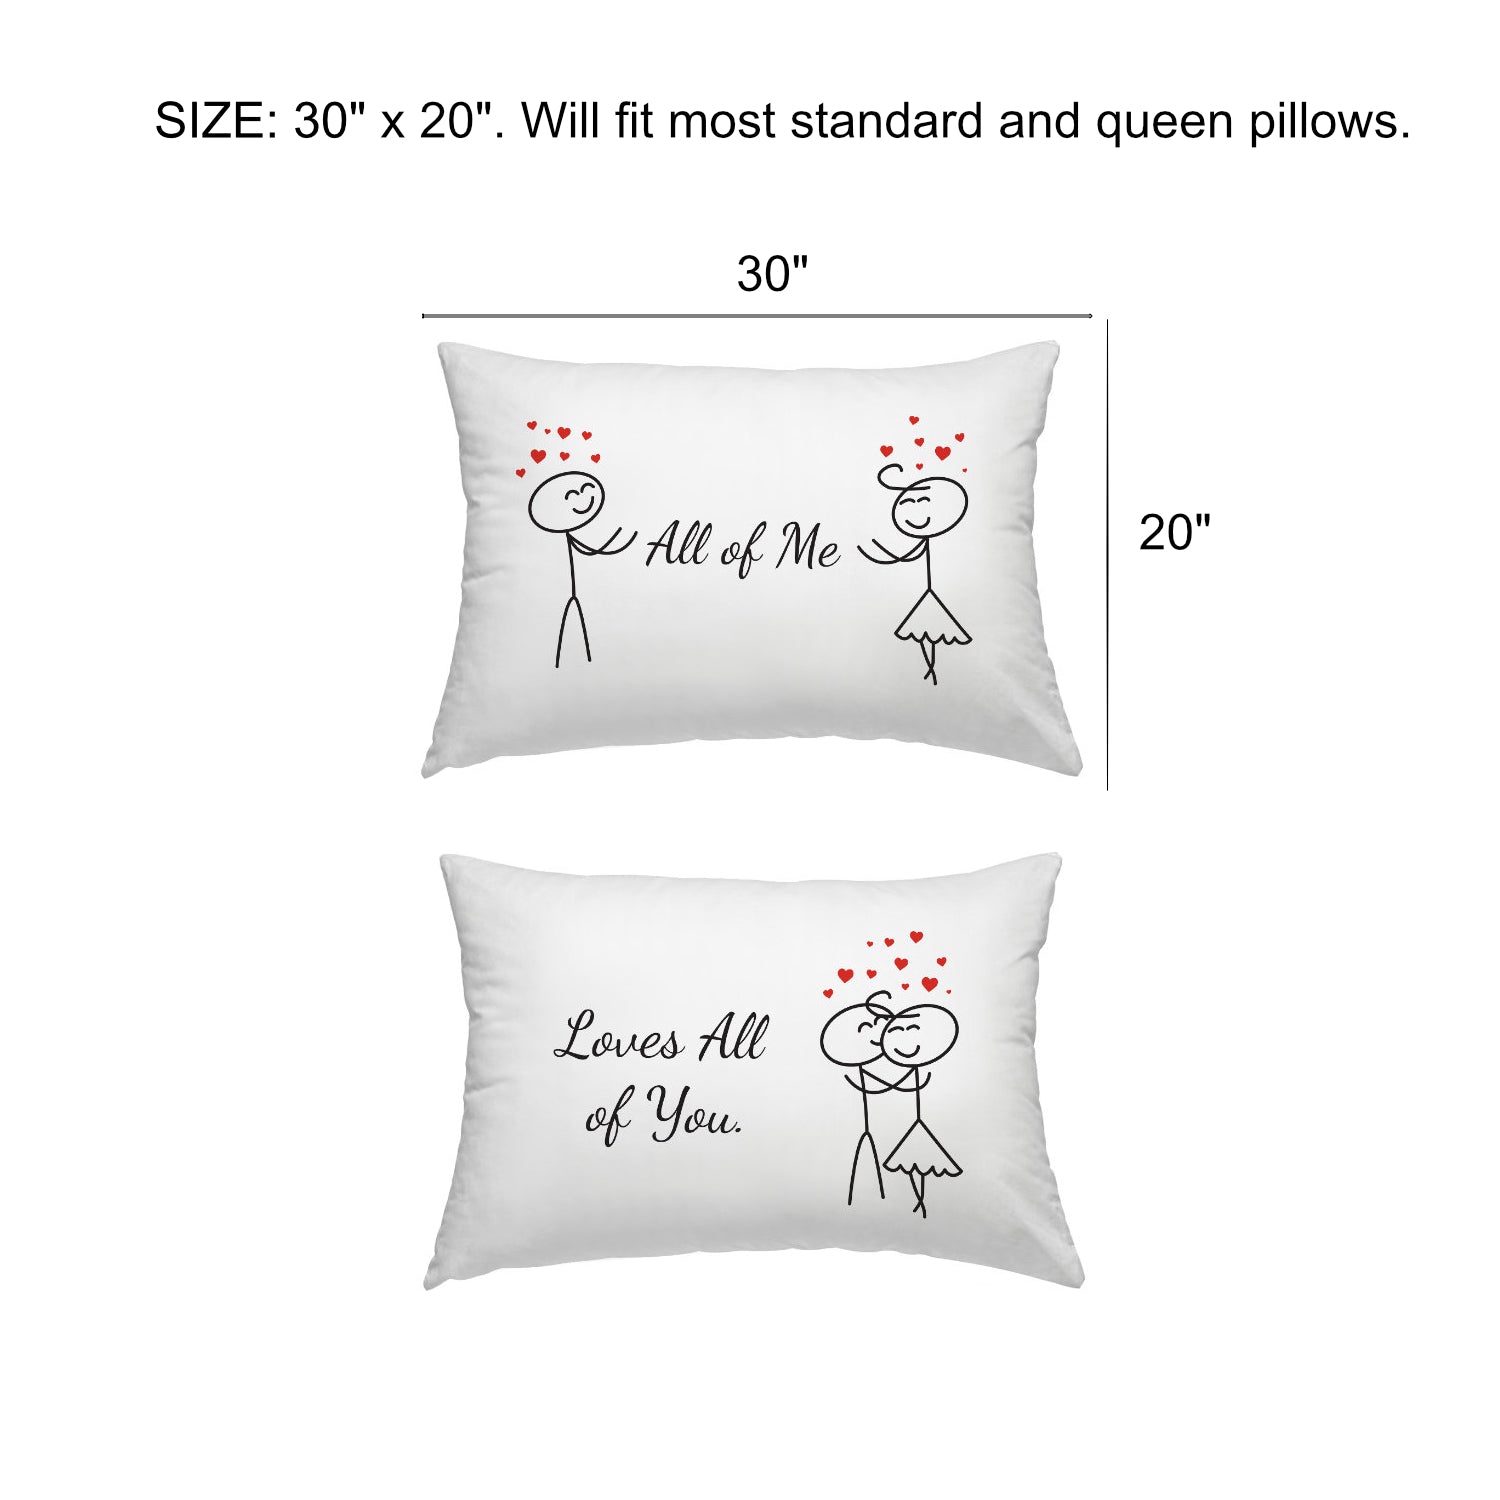 BoldLoft Couple Gifts-Matching Couples Gifts-His and Hers Gifts